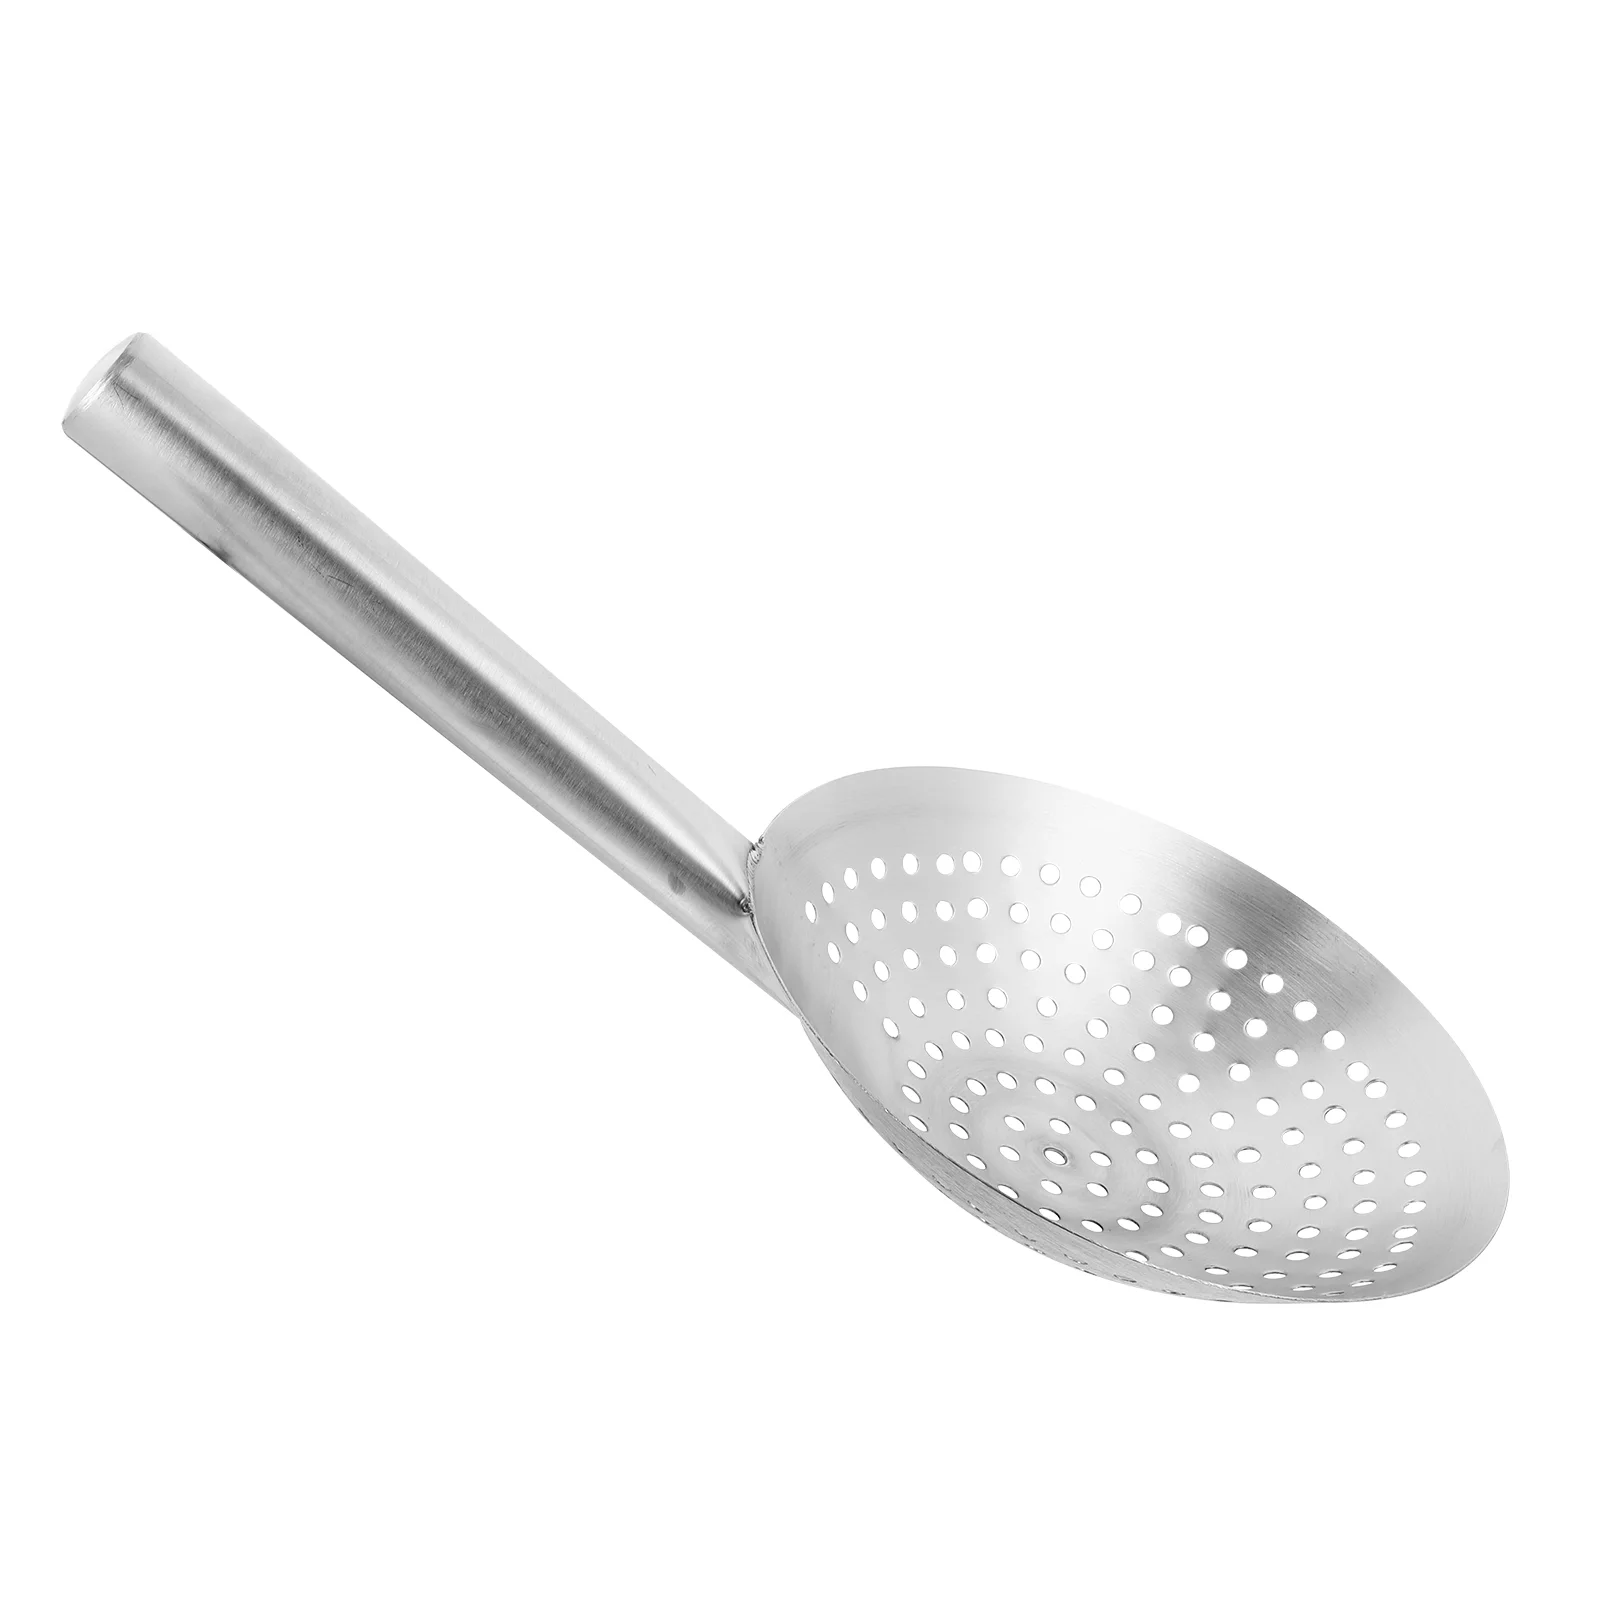 

Strainer Spoon Skimmer Ladle Slotted Colander Filter Kitchen Cooking Frying Metal Pasta Stainless Steel Oil Mesh Scoop Wire